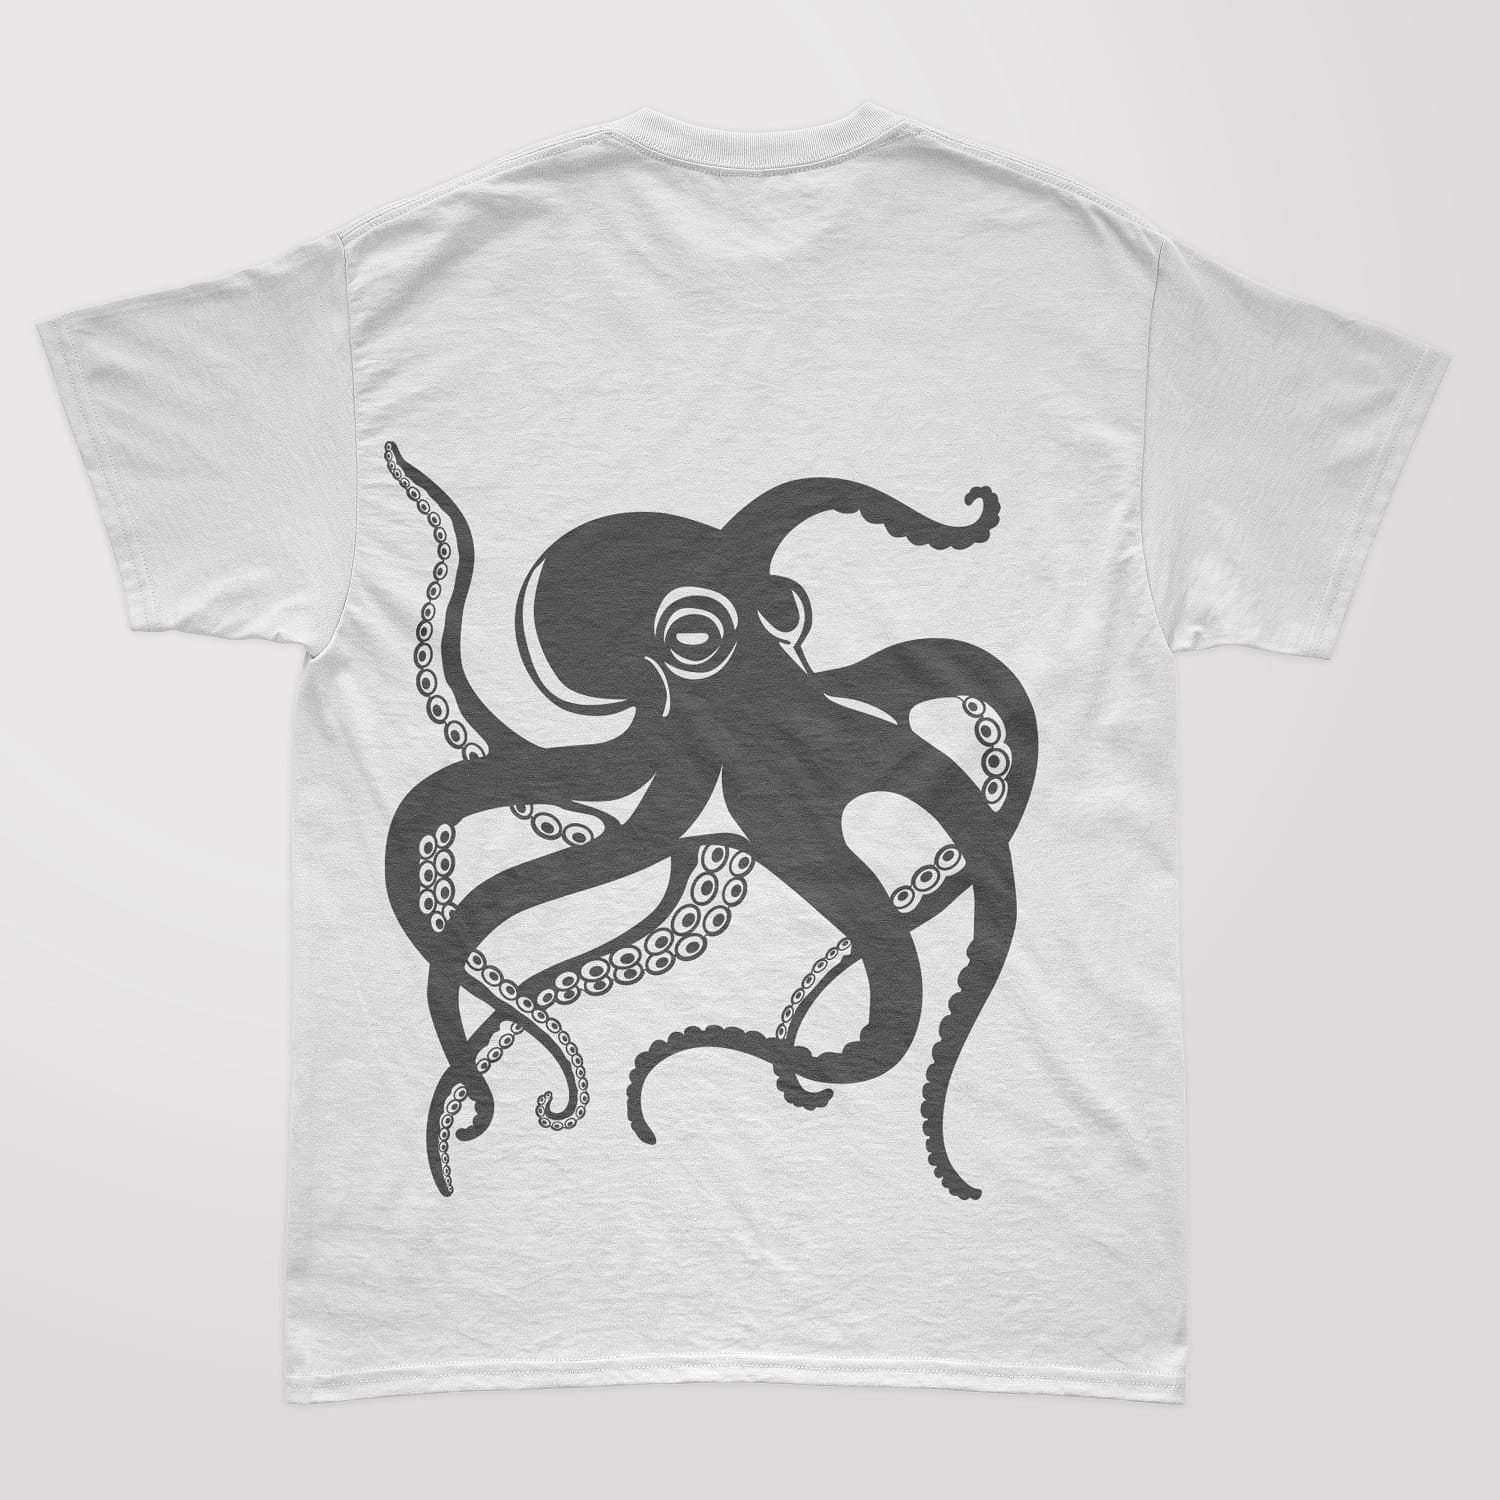 White T-shirt with a gray print of a dancing octopus silhouette.